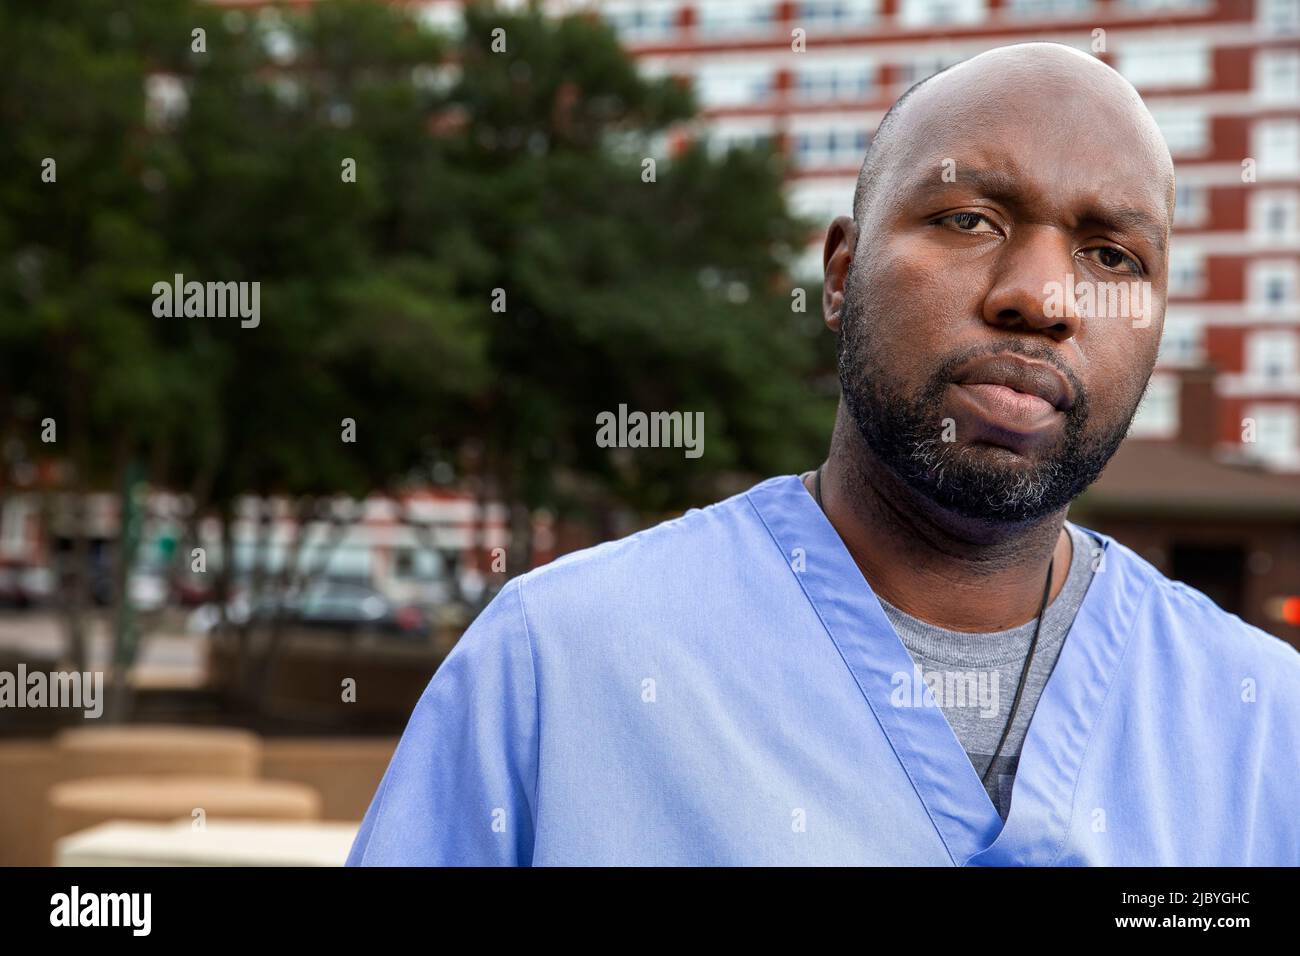 Portrait of middle aged man with beard and a bald head wearing scrubs standing outside looking at camera Stock Photo